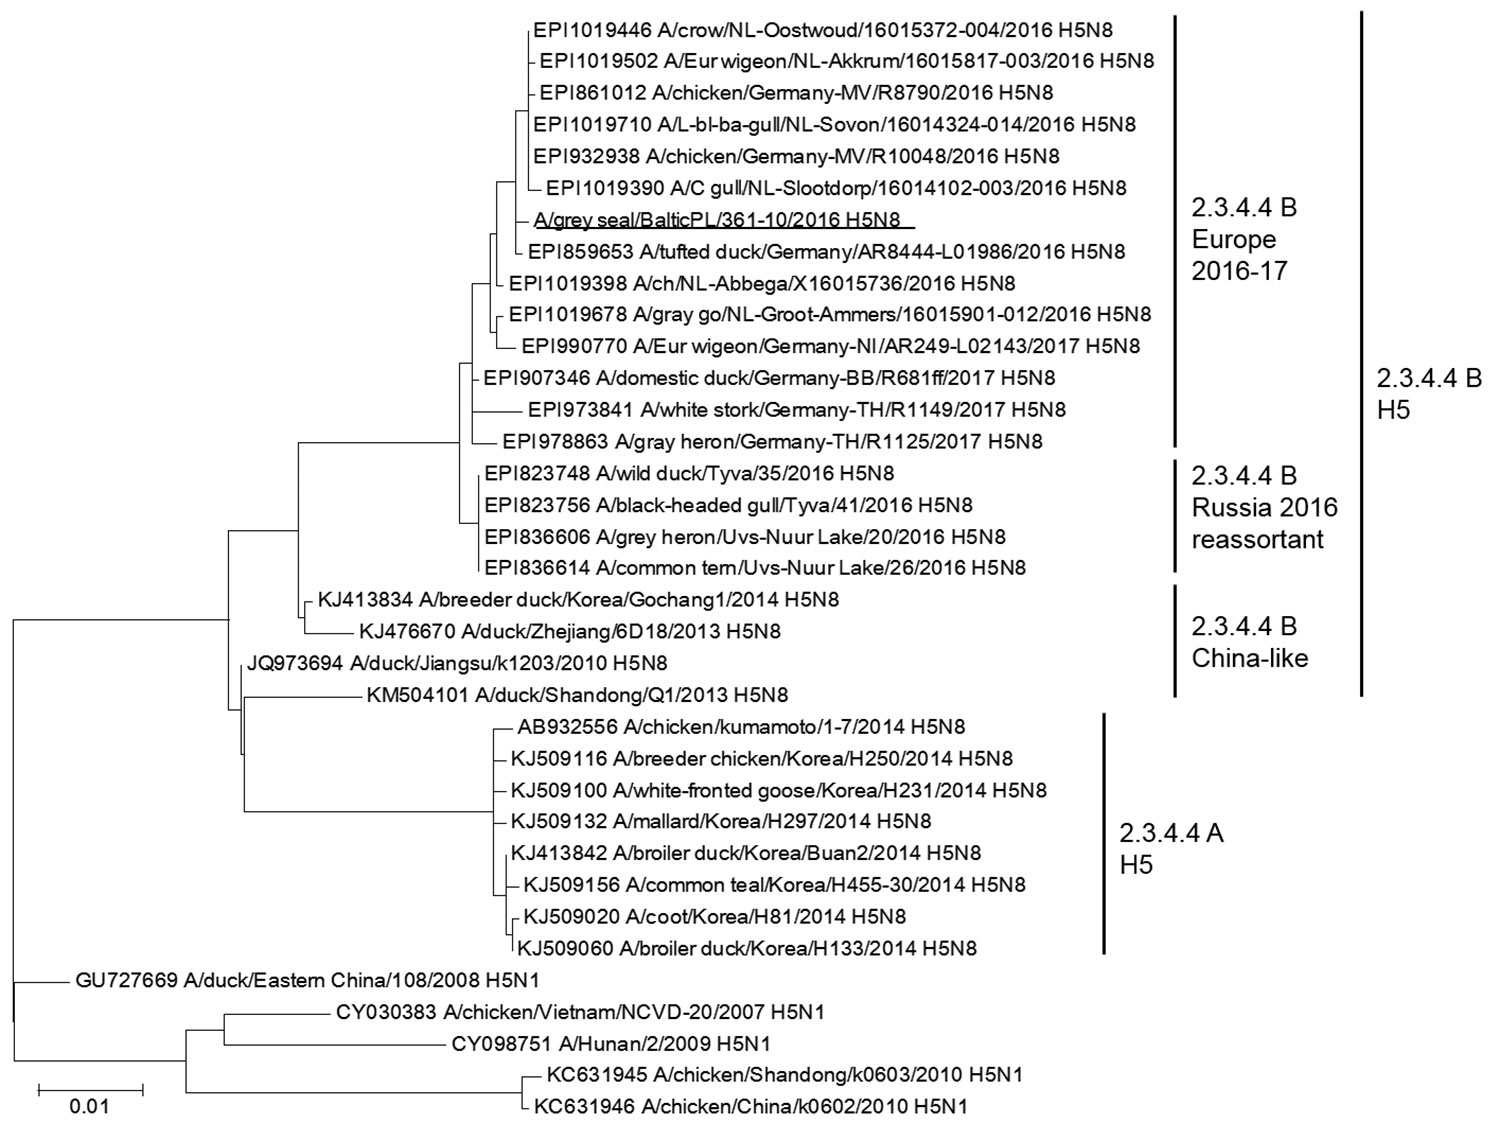 Maximum-likelihood phylogenetic tree for the hemagglutinin genes of a highly pathogenic avian influenza A(H5N8) virus isolated from a seal in the Baltic Sea region of Poland (underlined) and reference sequences. Different clades and the subclades of 2.3.4.4 are marked. Accession numbers for reference sequences are provided; numbers beginning with EPI are from the GISAID EpiFLU database (https://www.gisaid.org), others from GenBank. Scale bar indicates nucleotide substitutions per site.